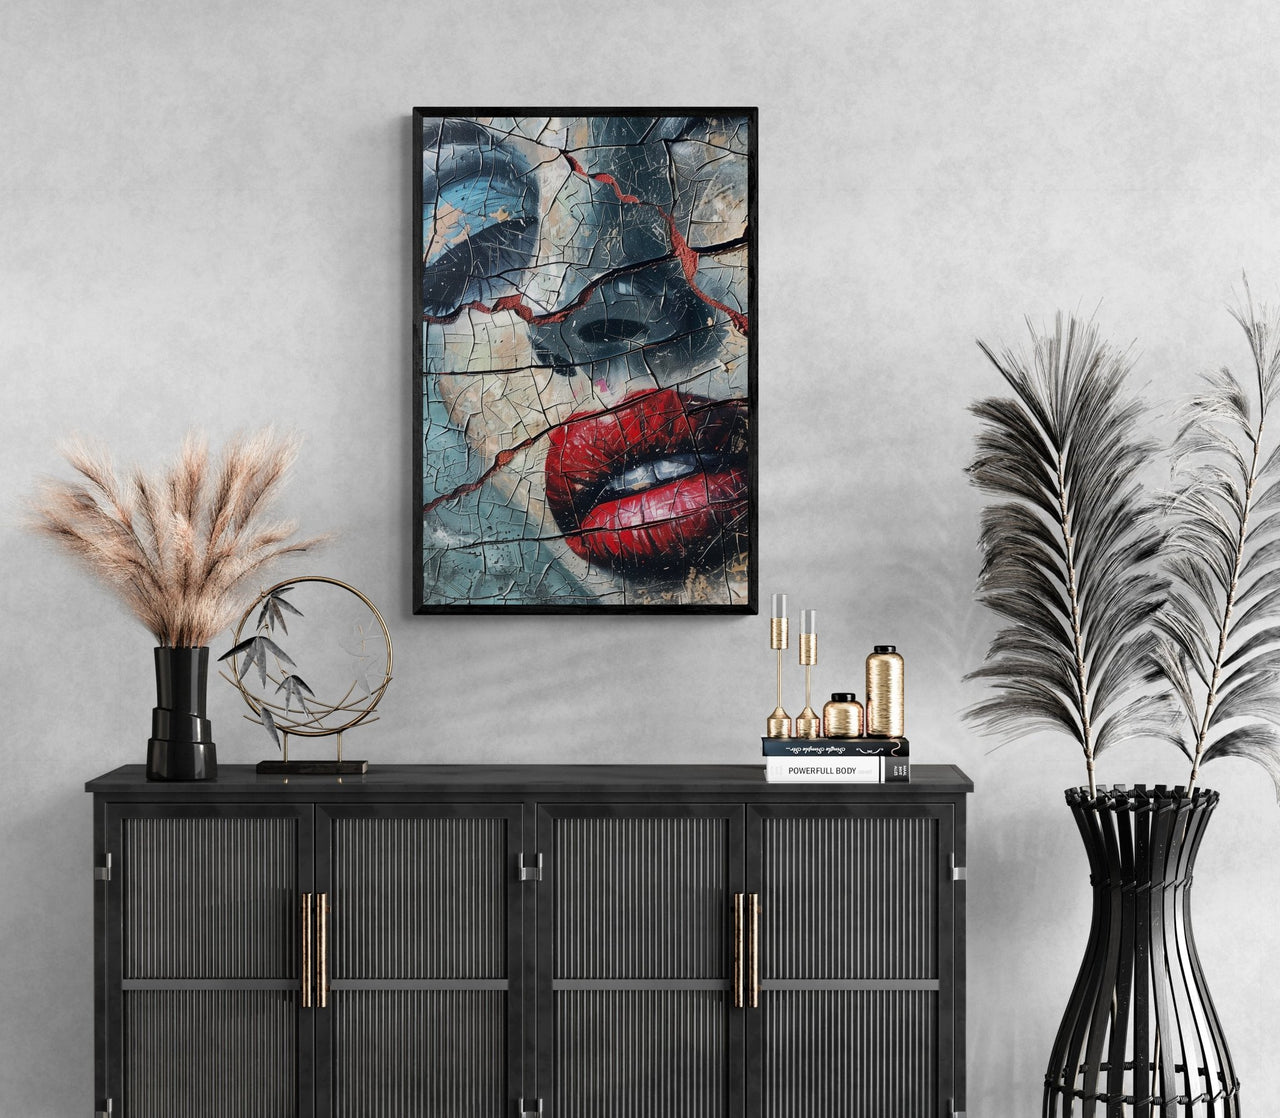 Dramatic framed canvas print from Milton Wes Art, showcasing a cracked effect over a woman's red-lipped mouth and nose, enhancing an elegant space with contemporary furnishings, available at miltonwesart.com, Harlem NYC